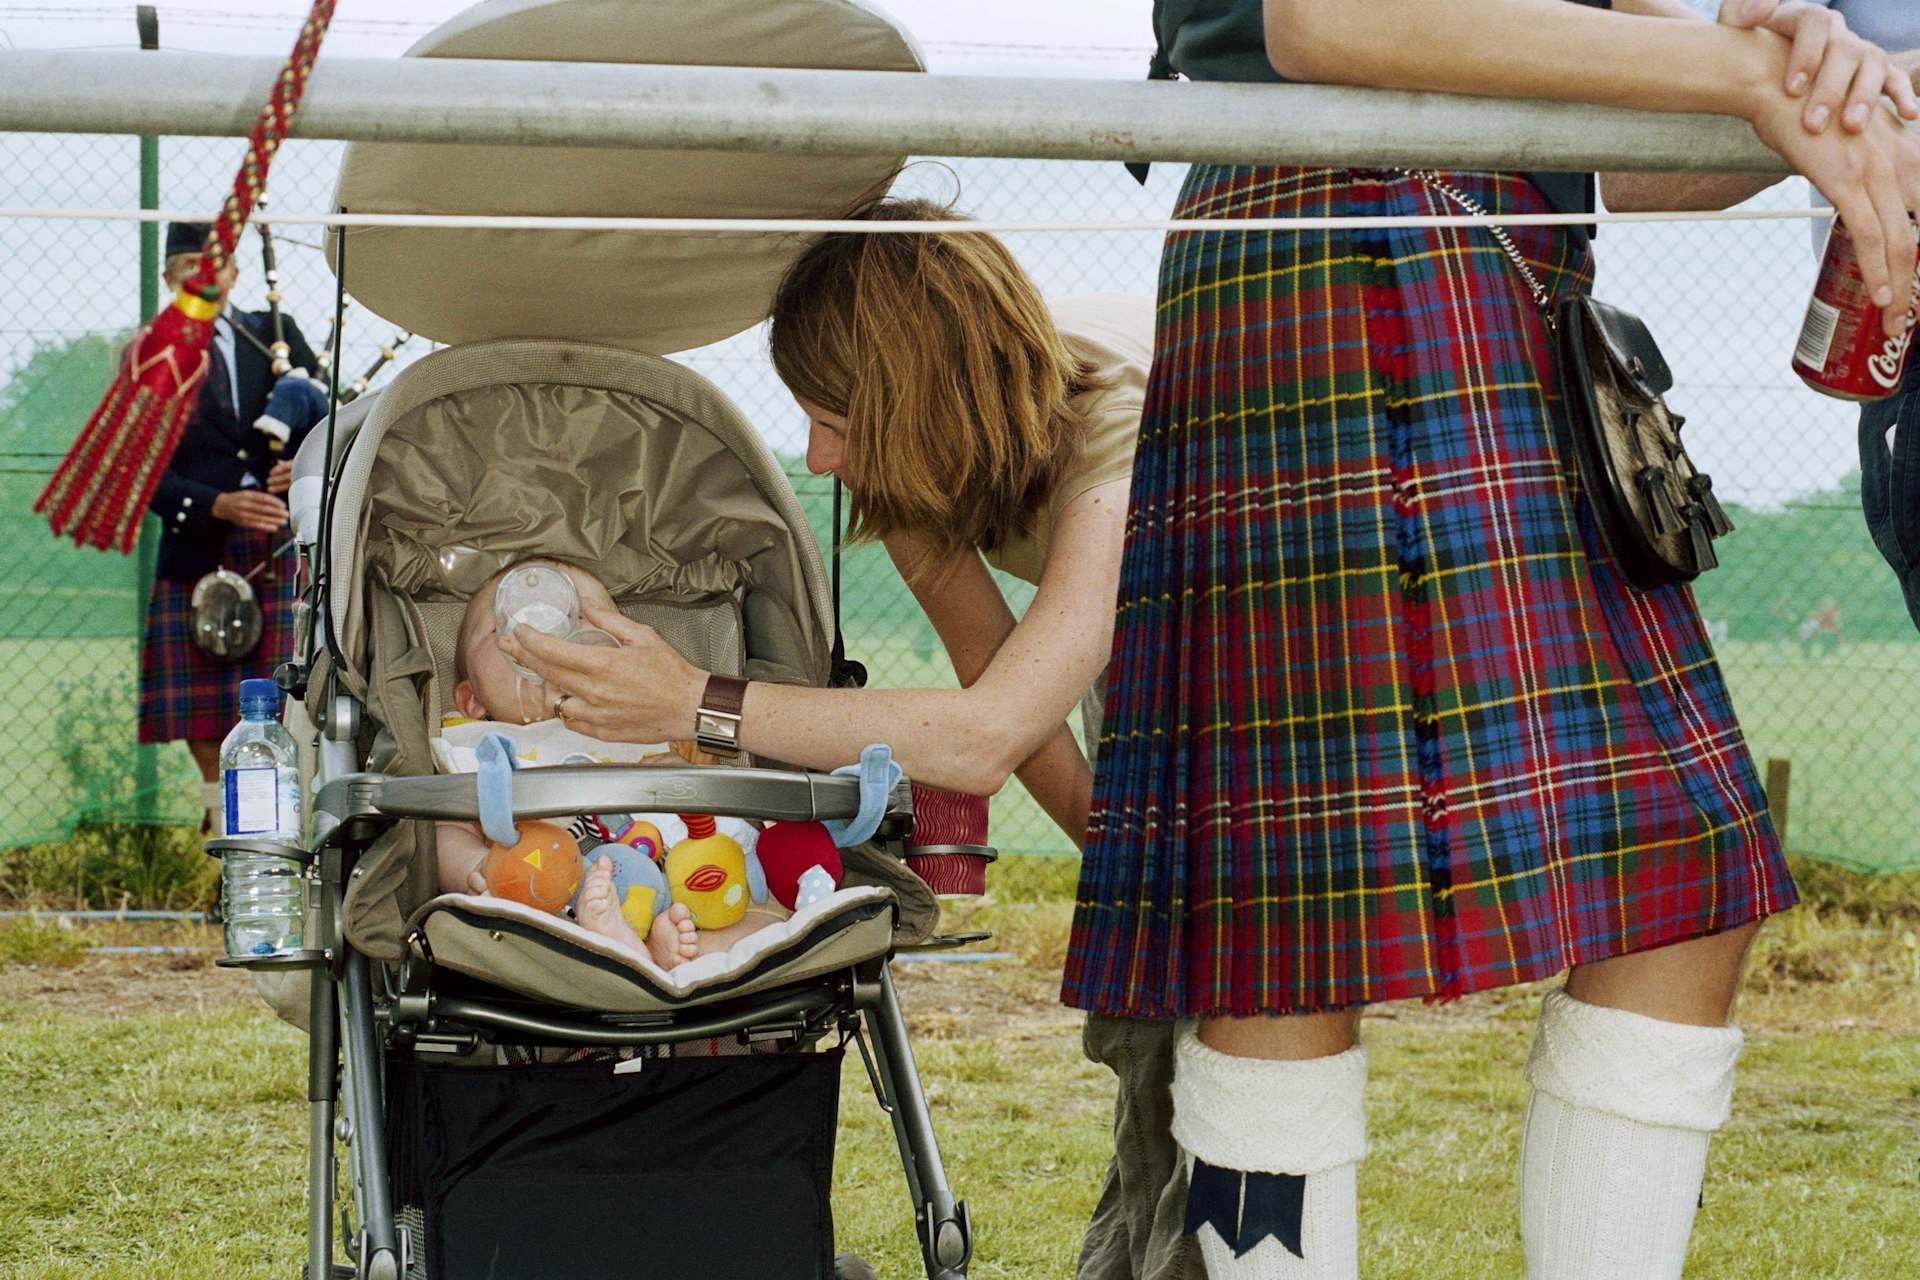 Martin Parr pays tribute to Scotland in new photo book